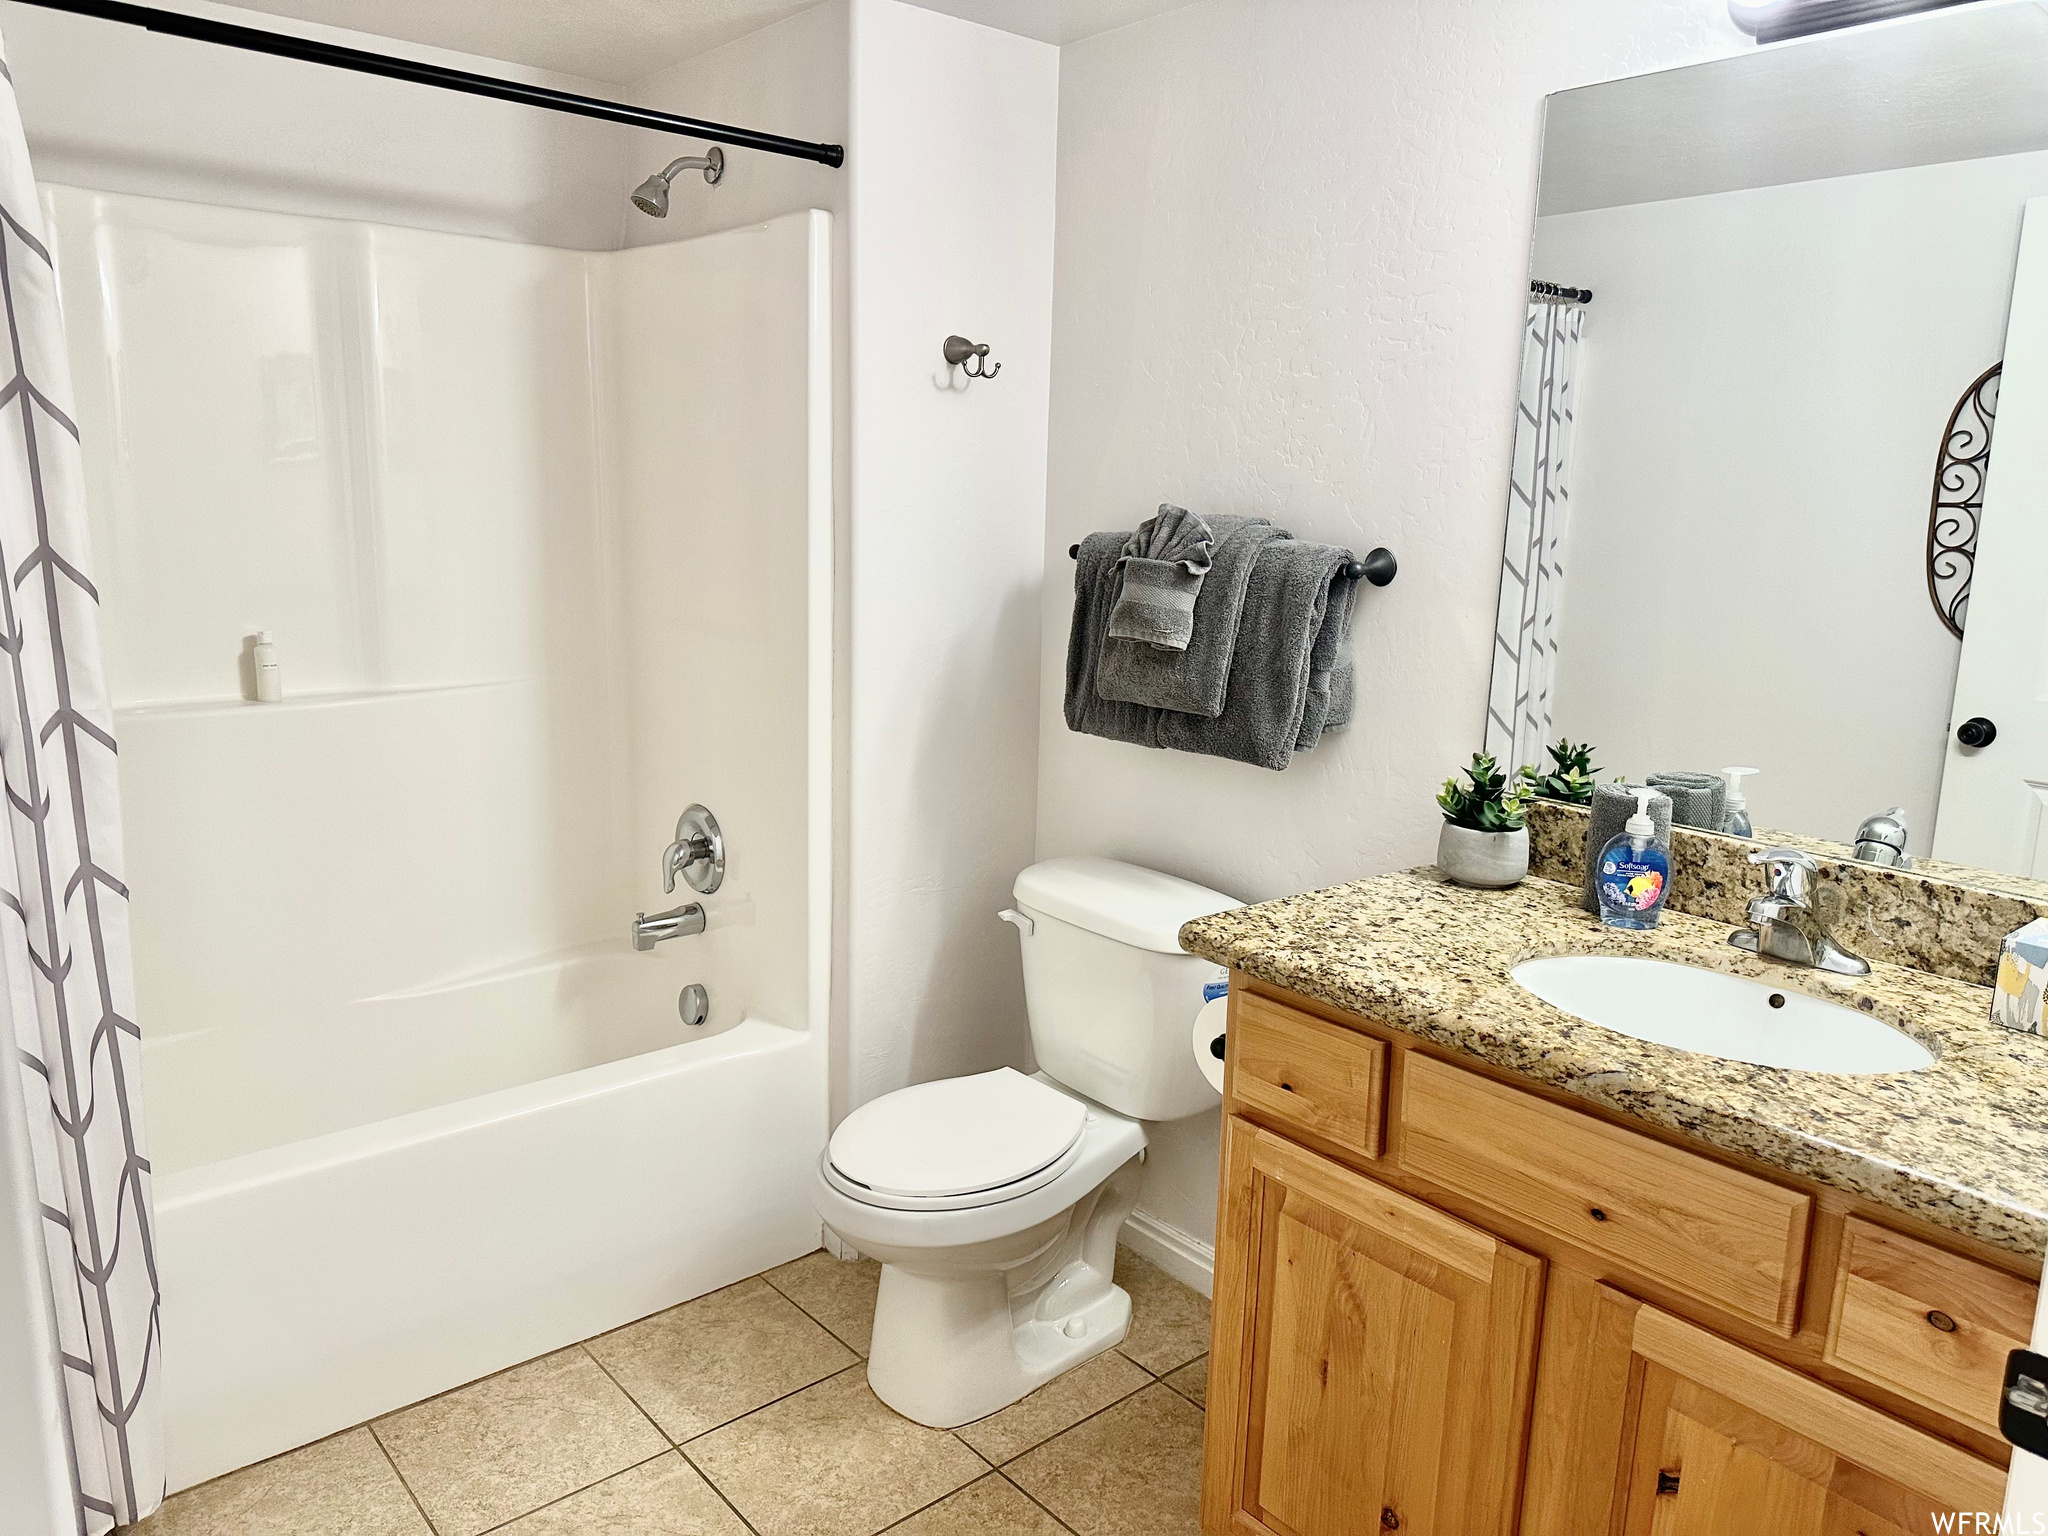 Full bathroom with tile flooring, toilet, shower / tub combo with curtain, and vanity